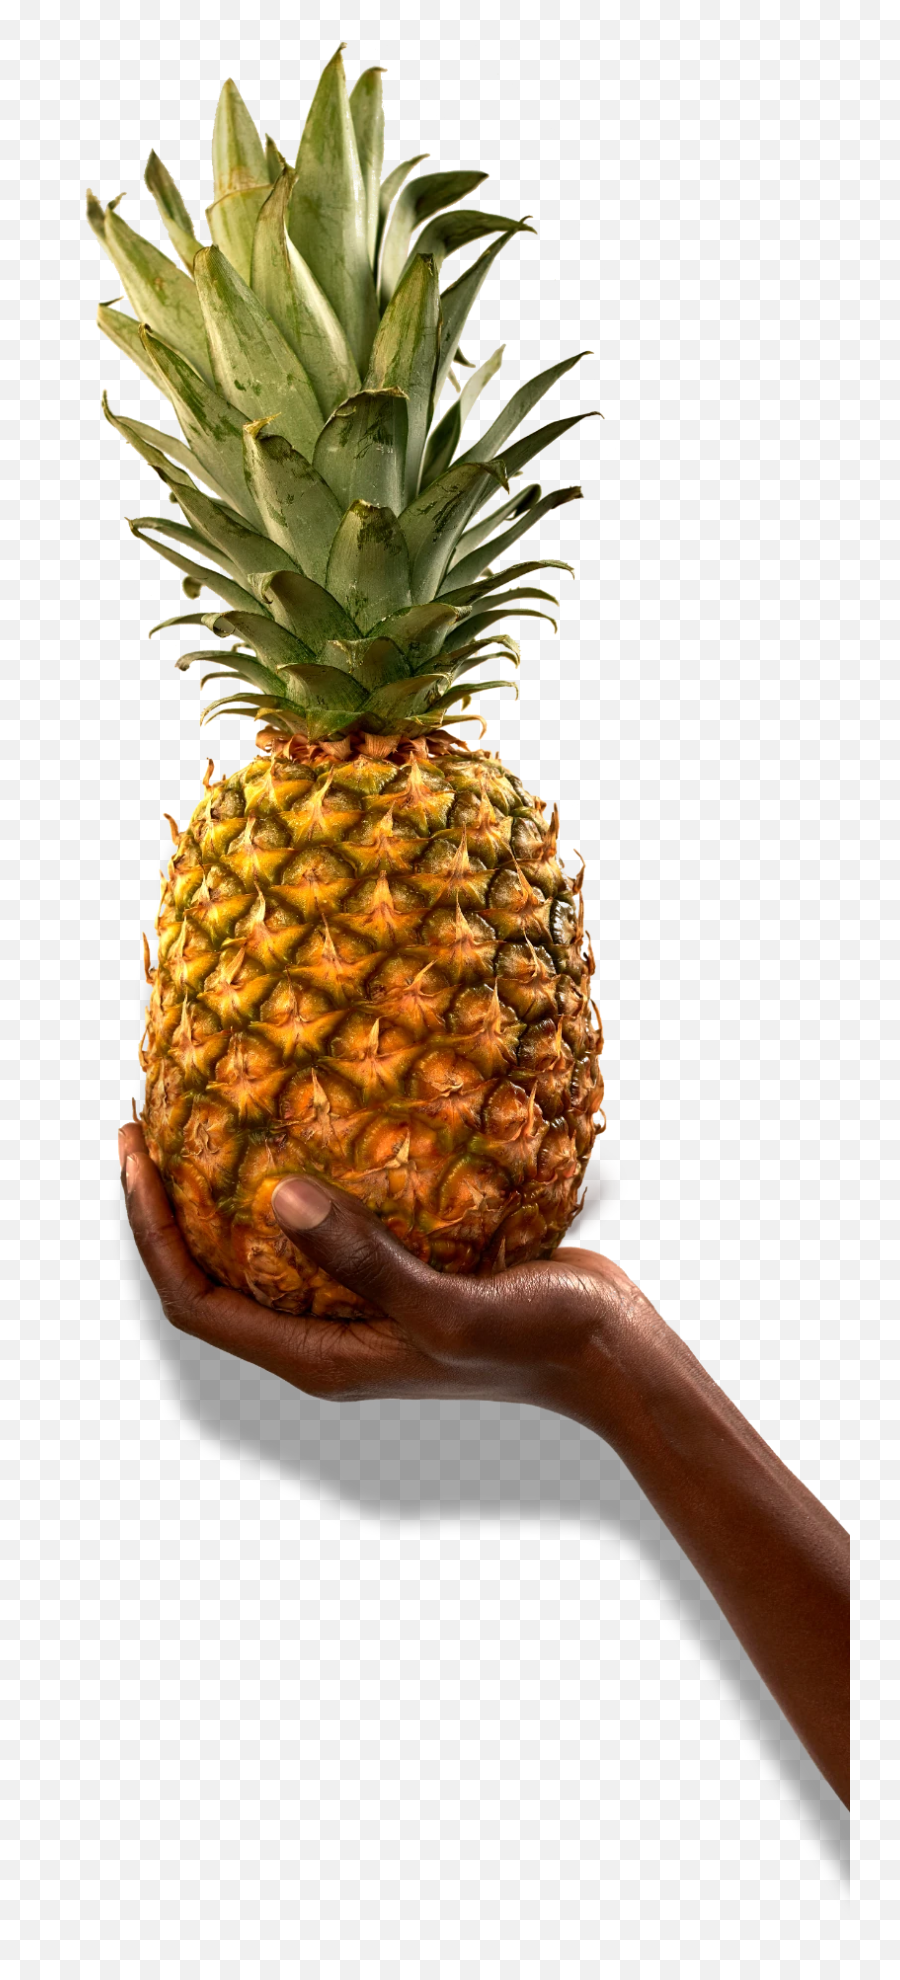 Our Fruit - Party Pineapple U2013 The Jali Fruit Co Pineapple Emoji,Pineapple Emoji